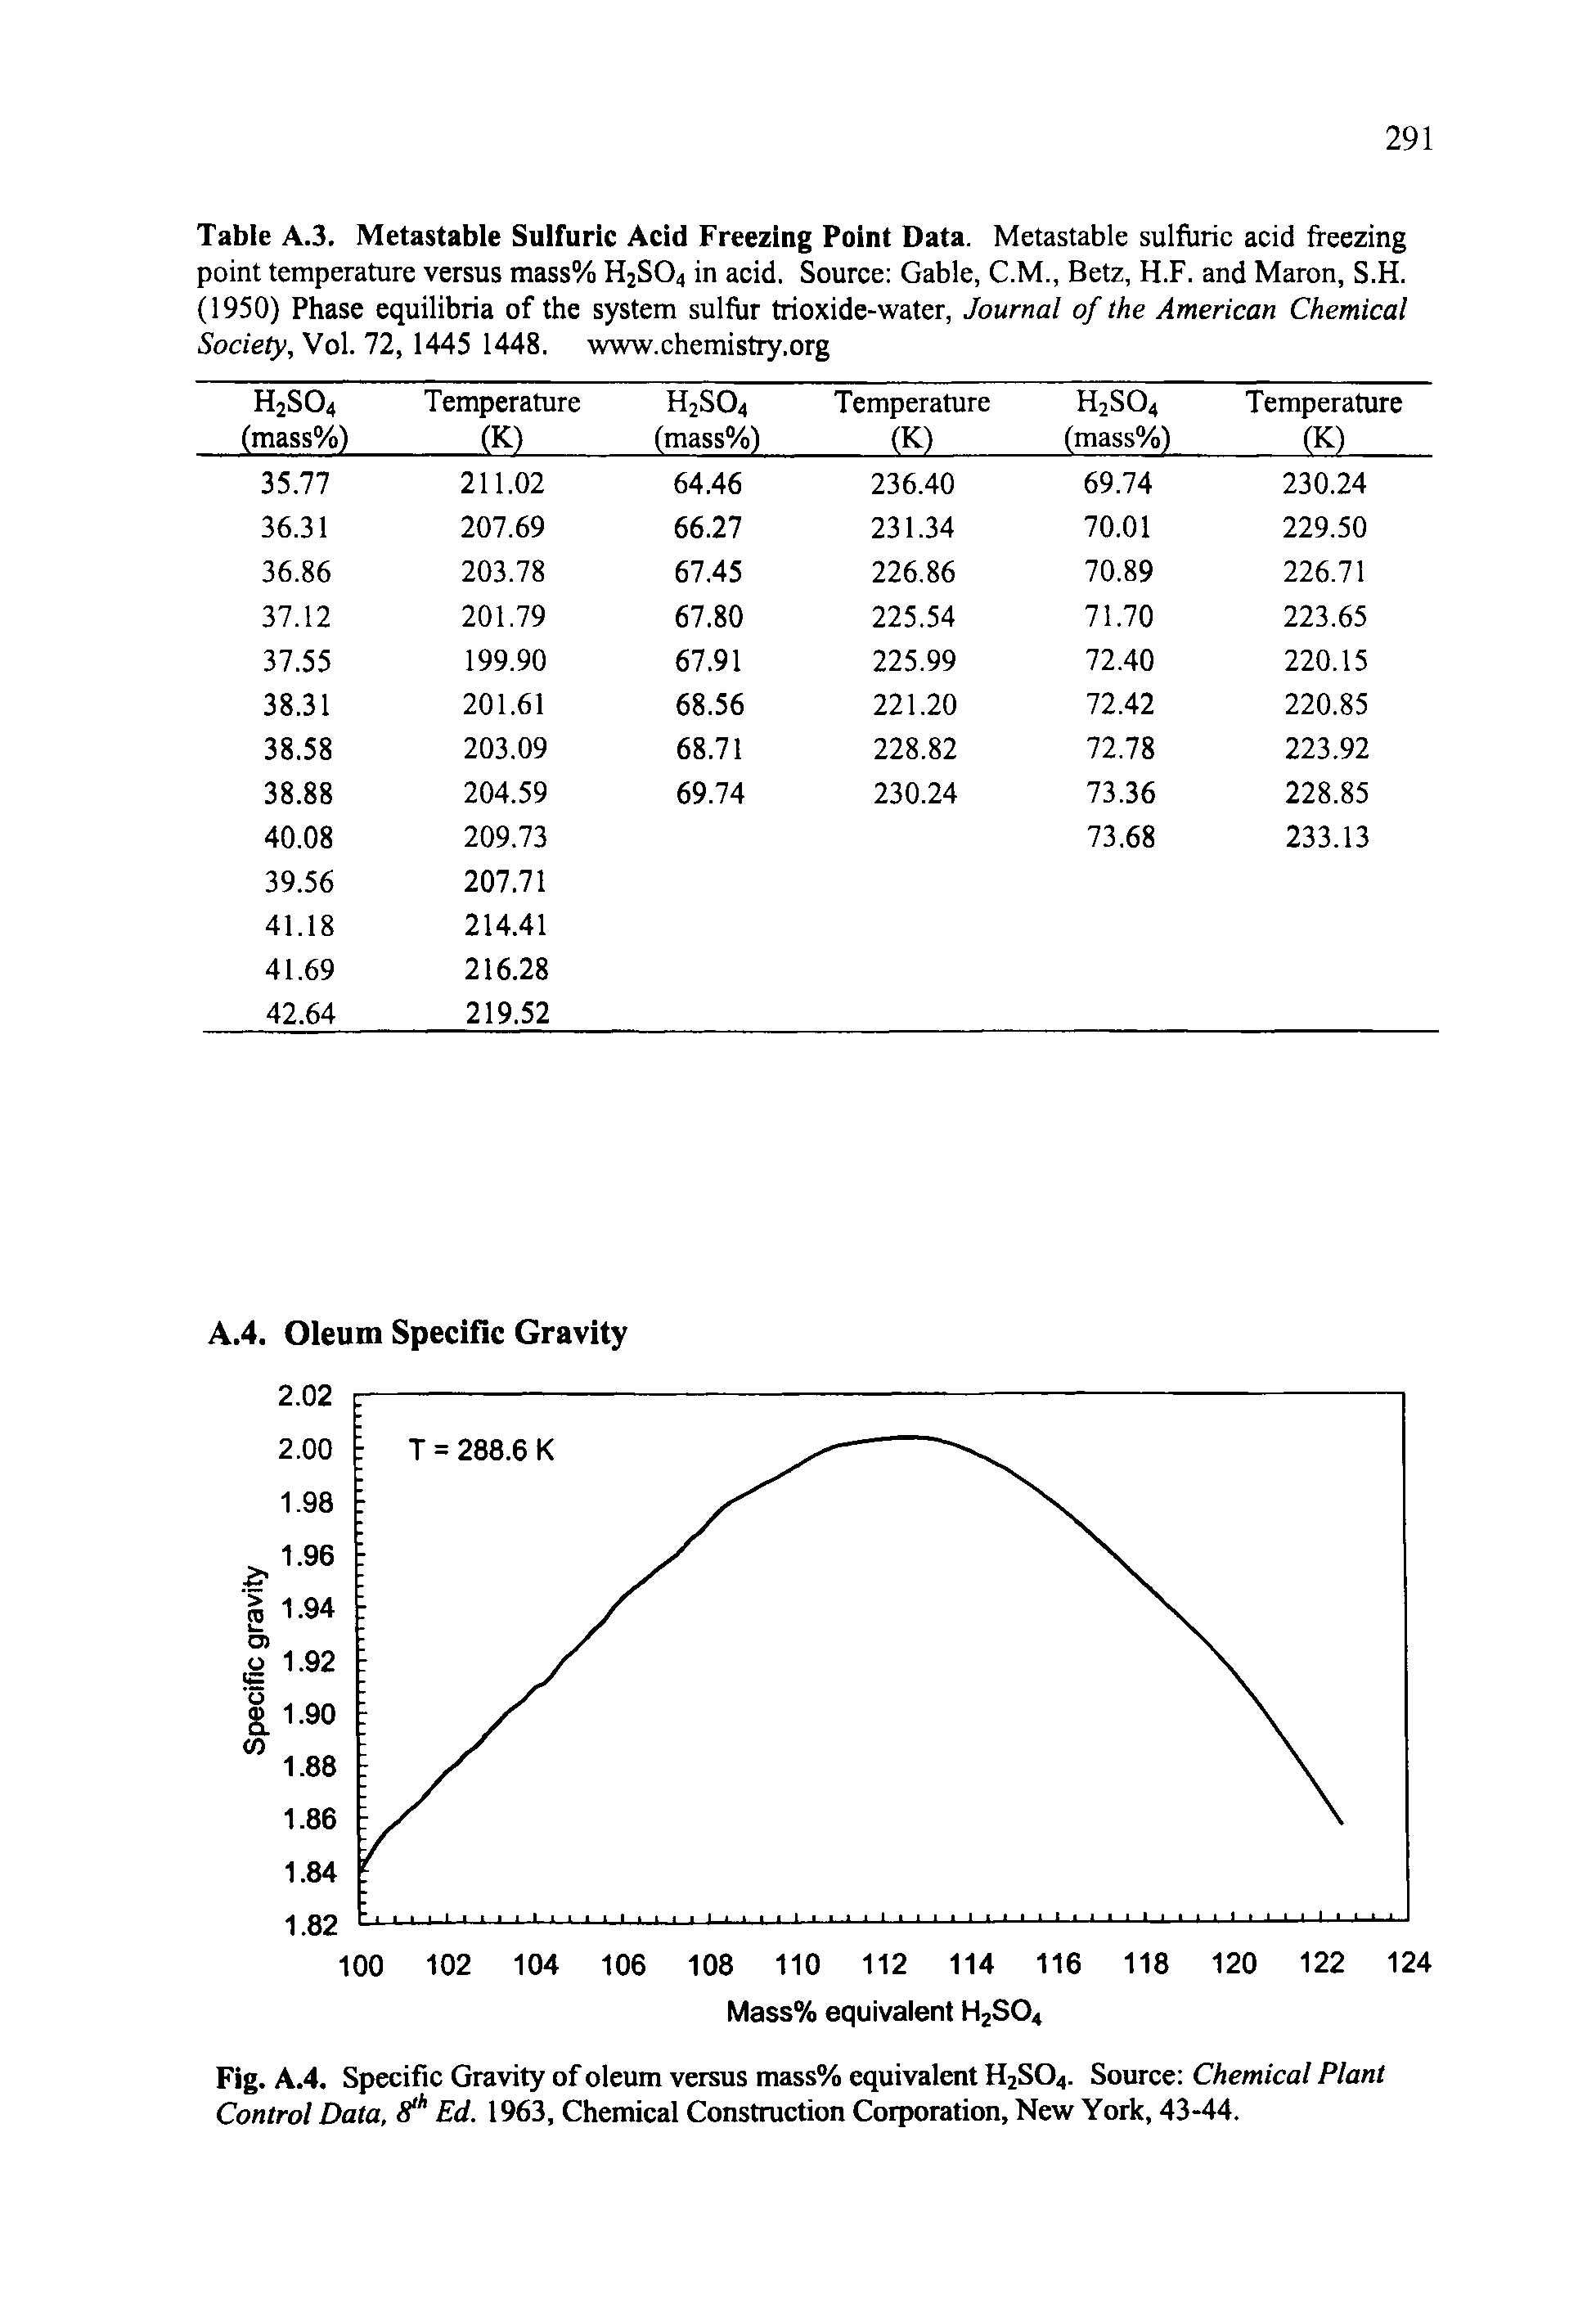 Fig. A.4. Specific Gravity of oleum versus mass% equivalent H2S04. Source Chemical Plant Control Data, 8 h Ed. 1963, Chemical Construction Corporation, New York, 43-44.